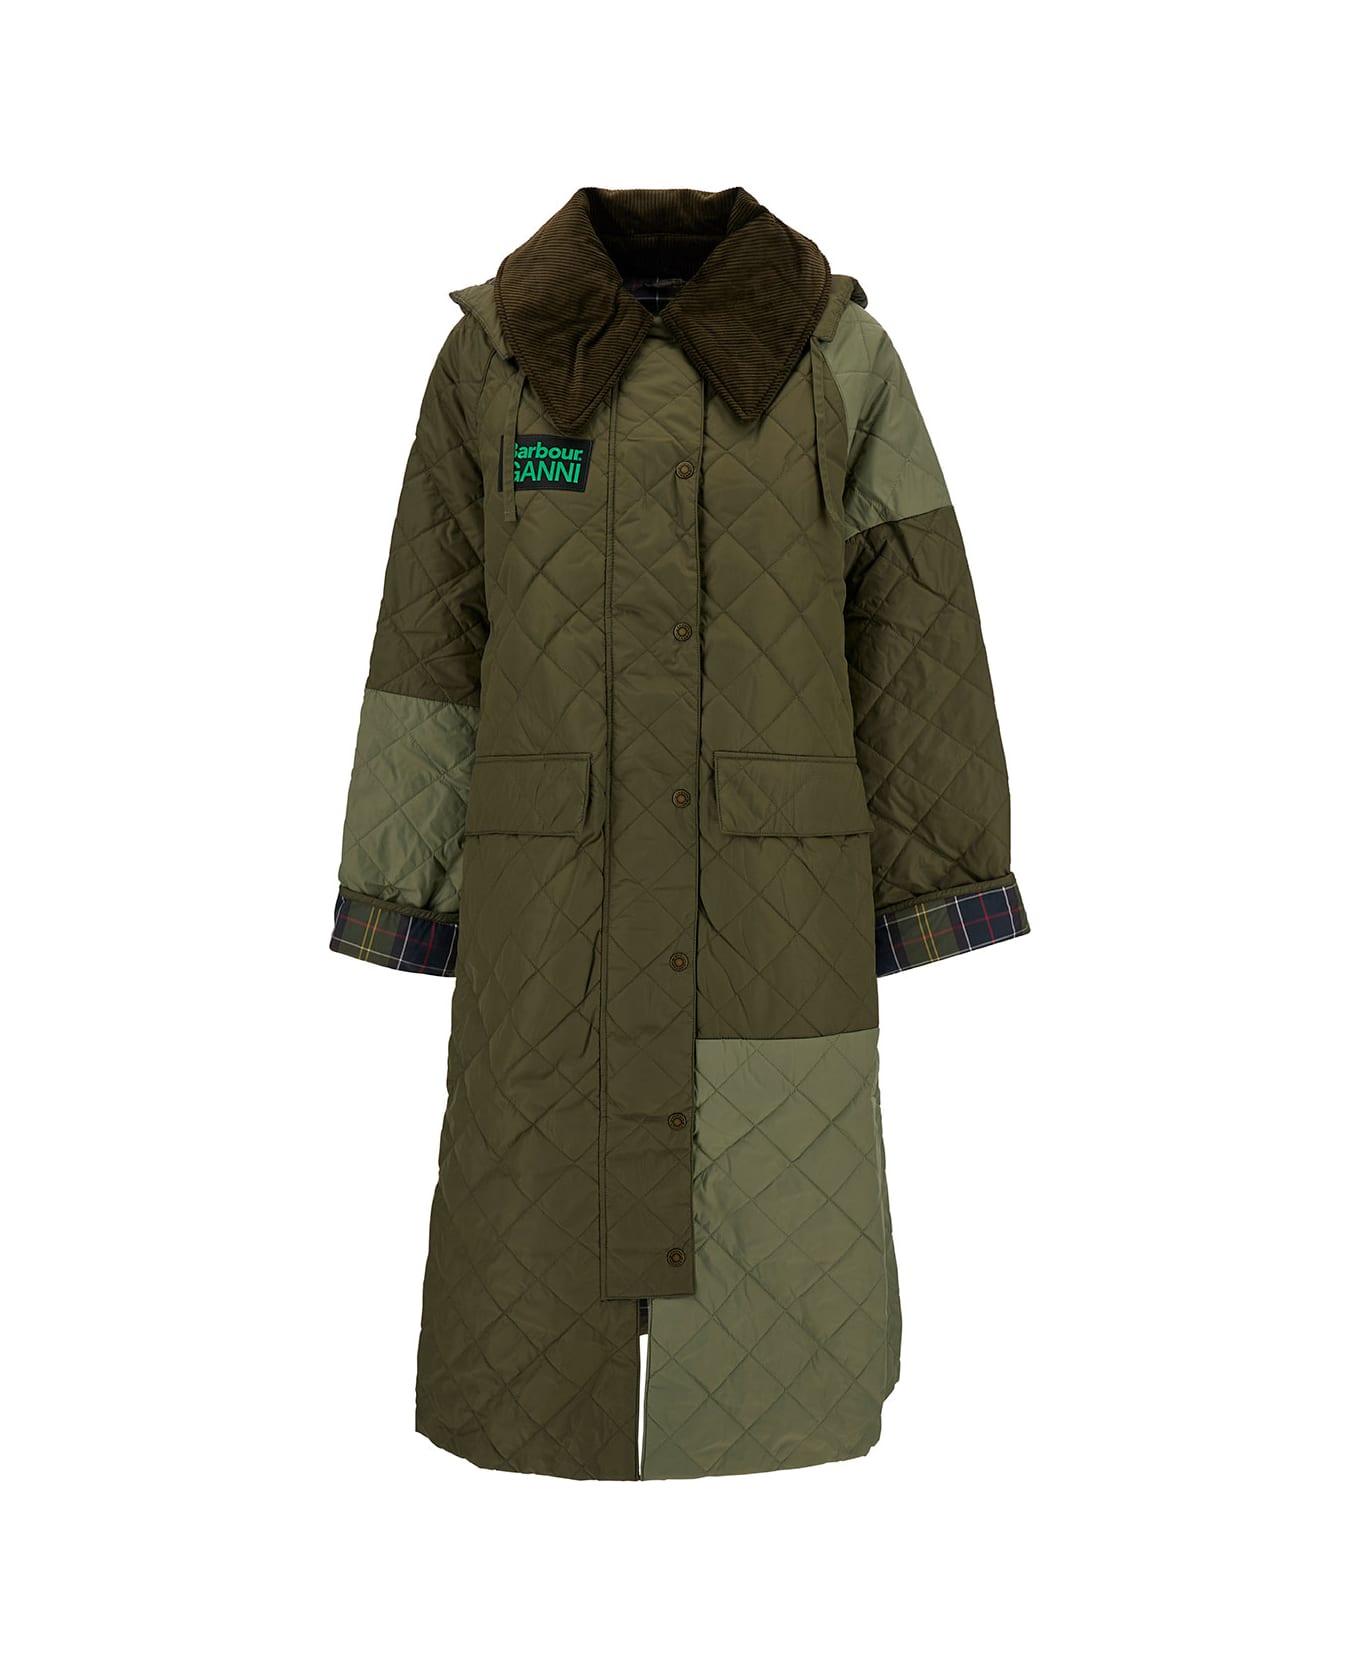 Barbour Green Patchwork Jacket With Logo Patch In Quilted Fabric Woman - Green